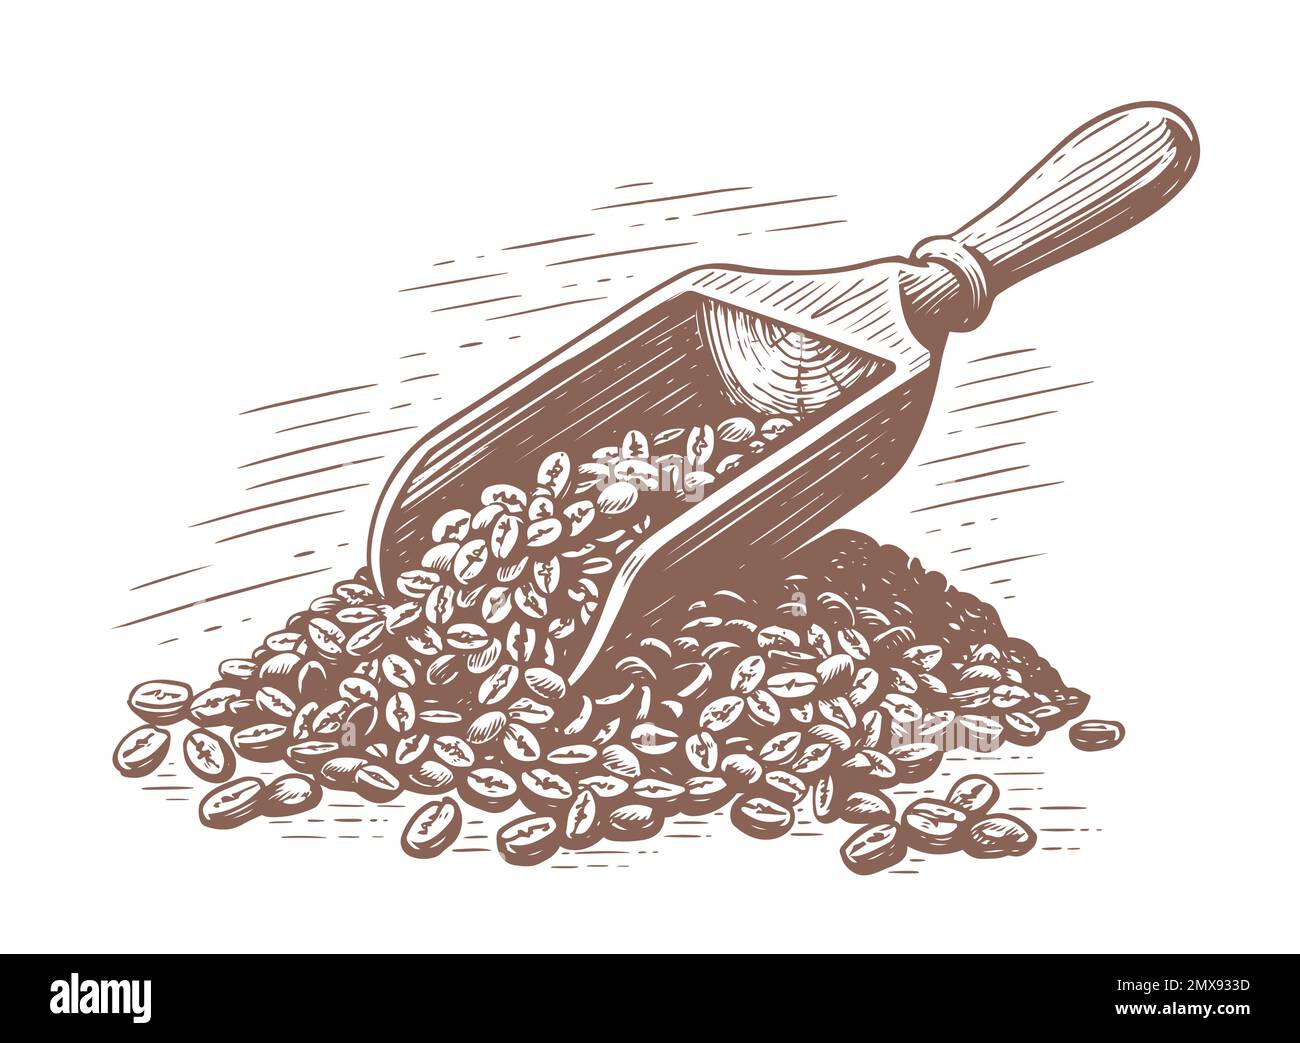 Grains of roasted coffee with a wooden spatula. Hand drawn sketch vintage vector illustration Stock Vector